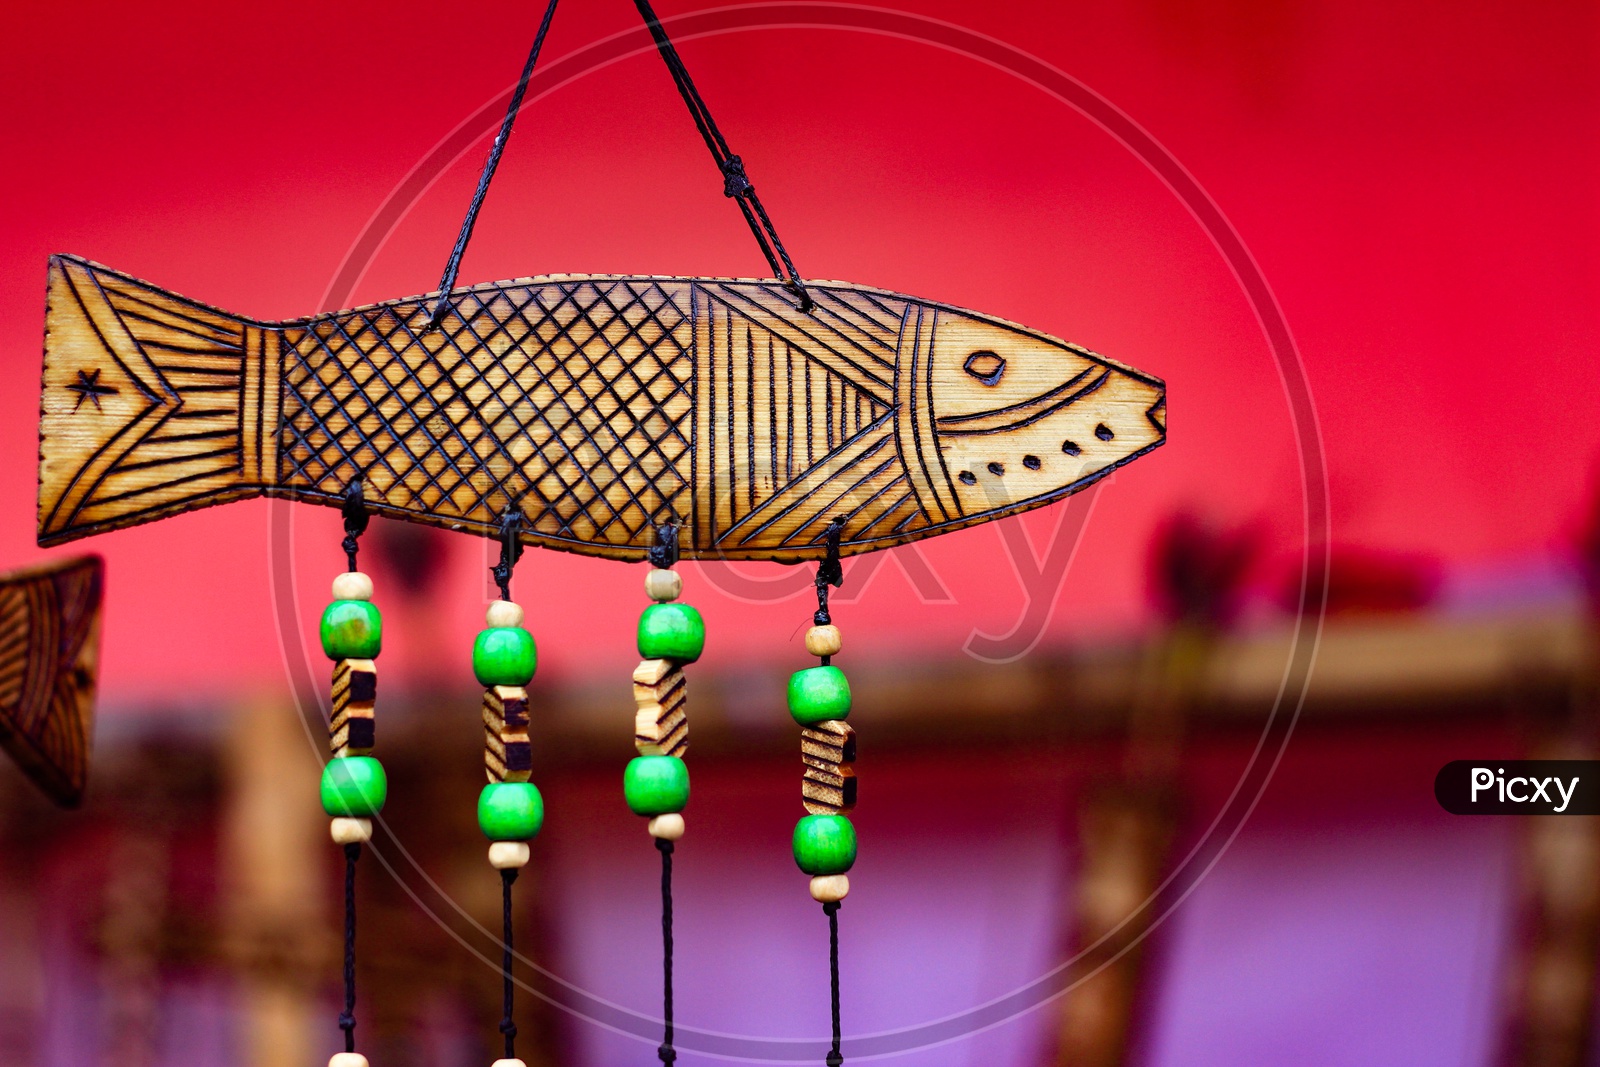 Hand Made Wooden Carving Engraved Fish Figure Artwork On Wood Plank With Suspended Green Beads On String.Tribal Artwork. Textured Background